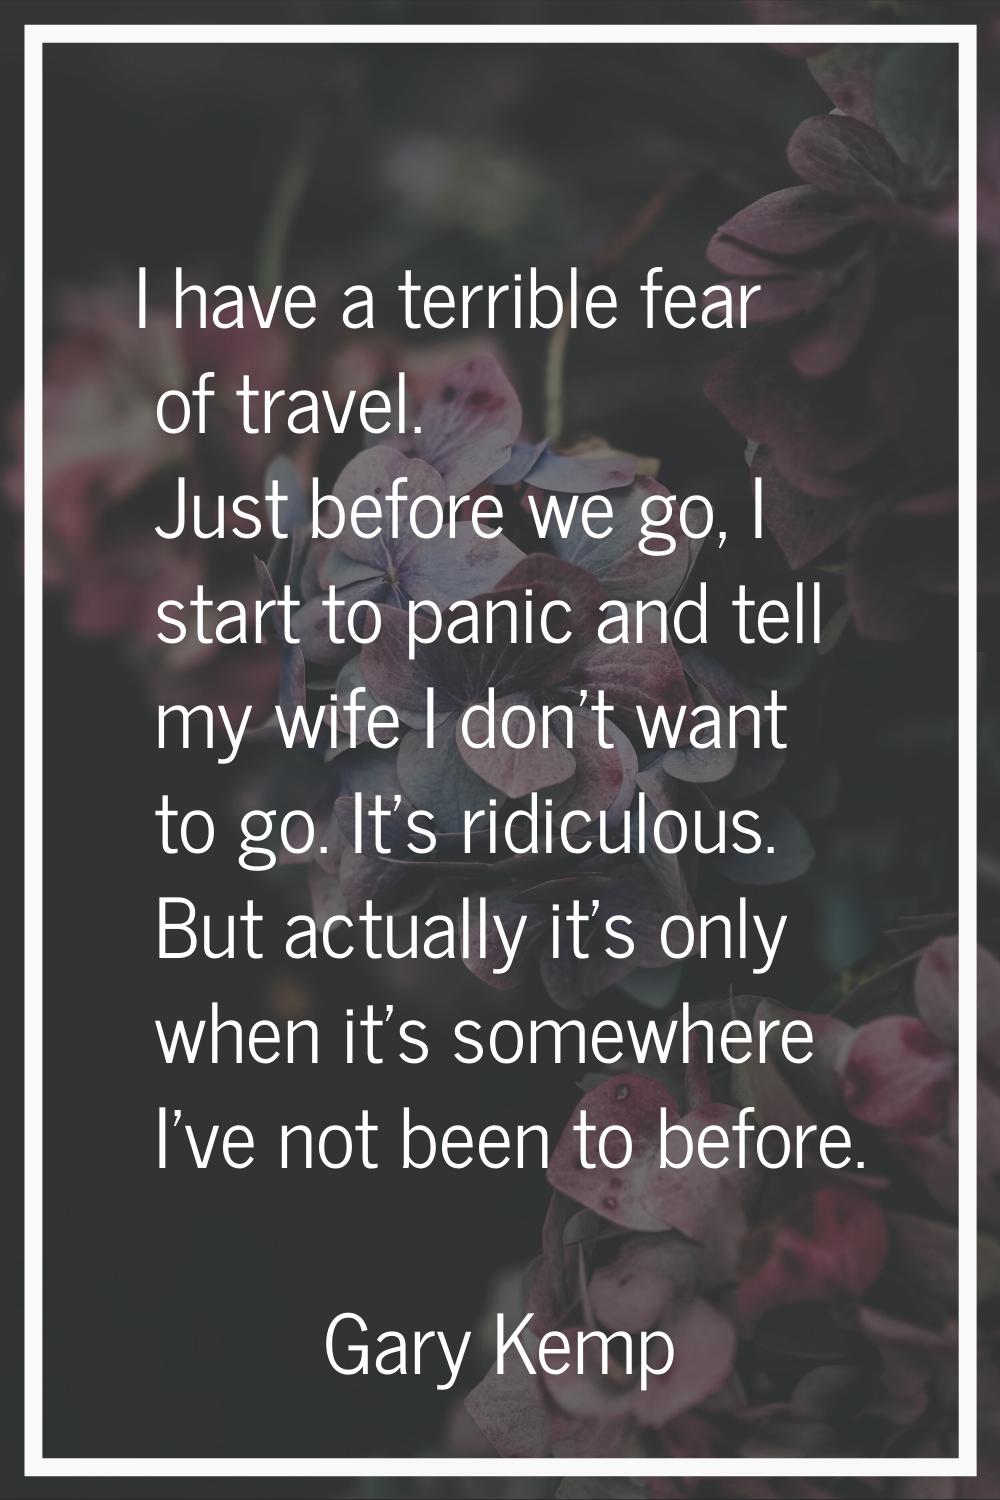 I have a terrible fear of travel. Just before we go, I start to panic and tell my wife I don't want